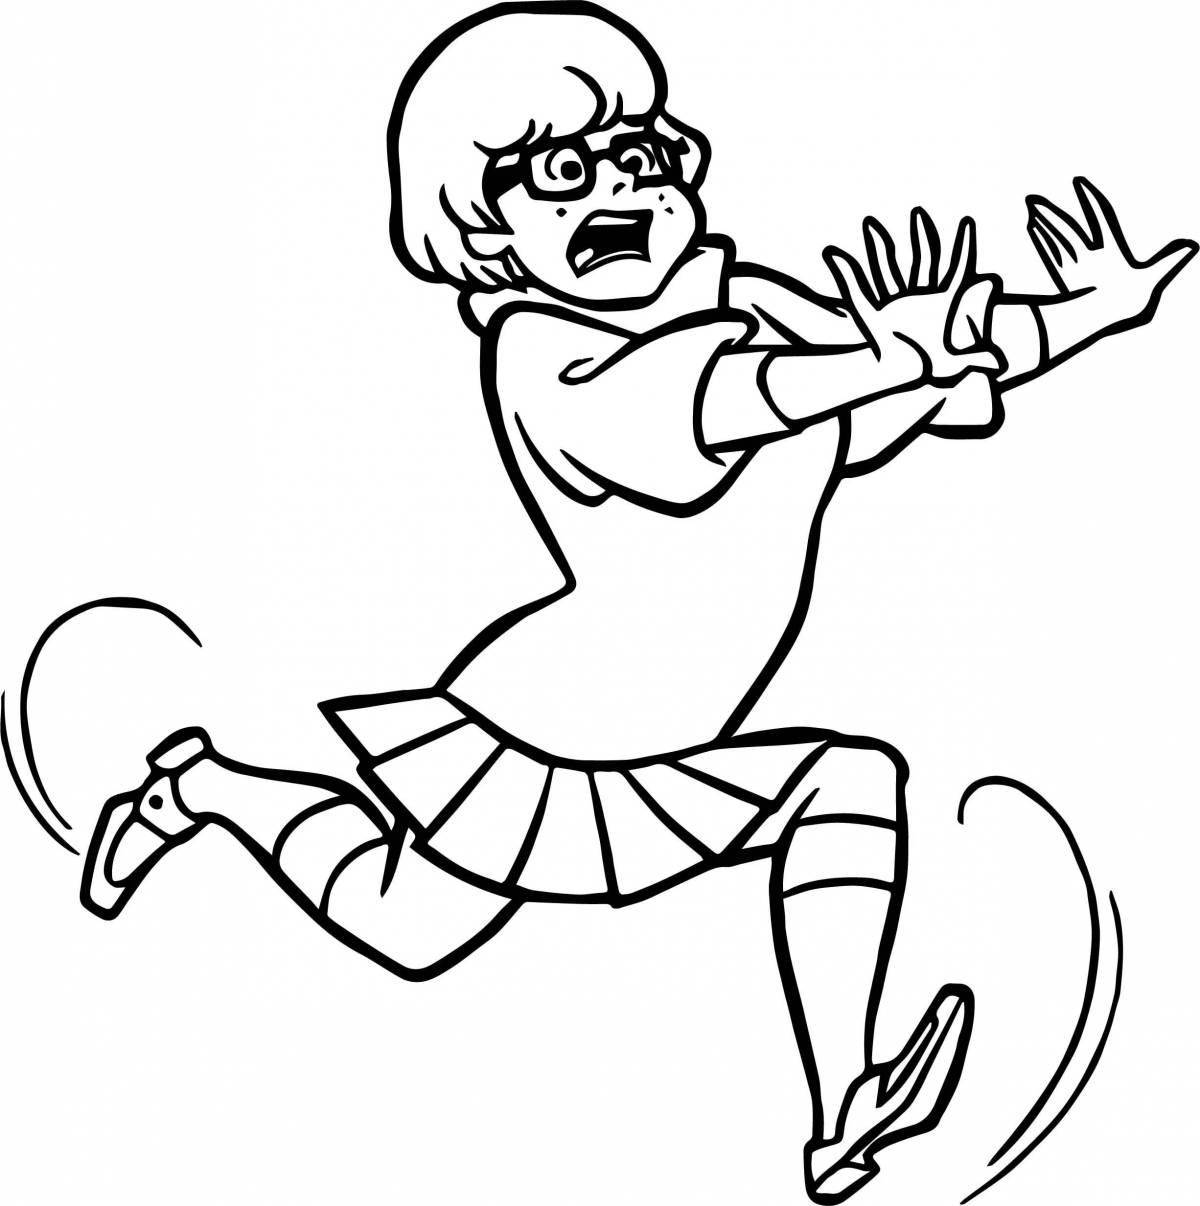 Live boy running coloring pages